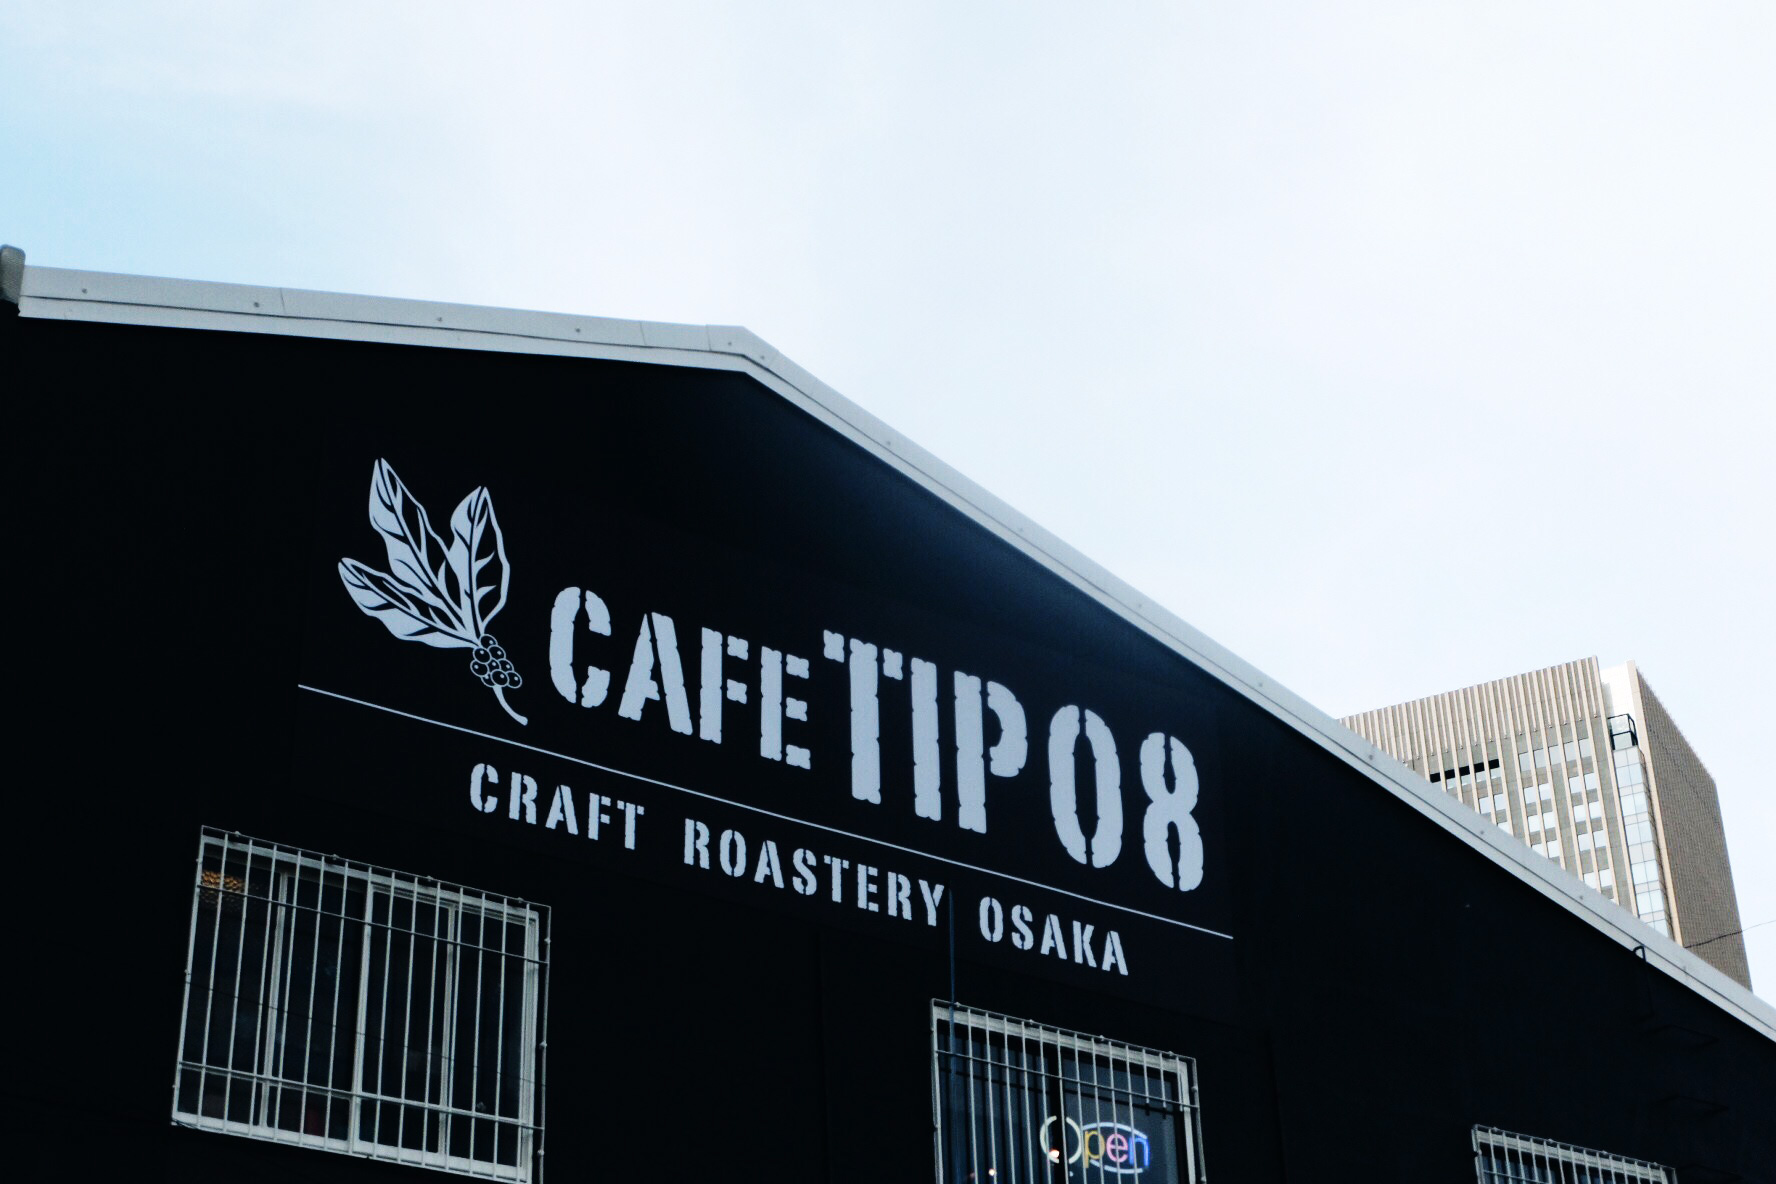 CAFE TIPO8（カフェ チーポ・オイト）